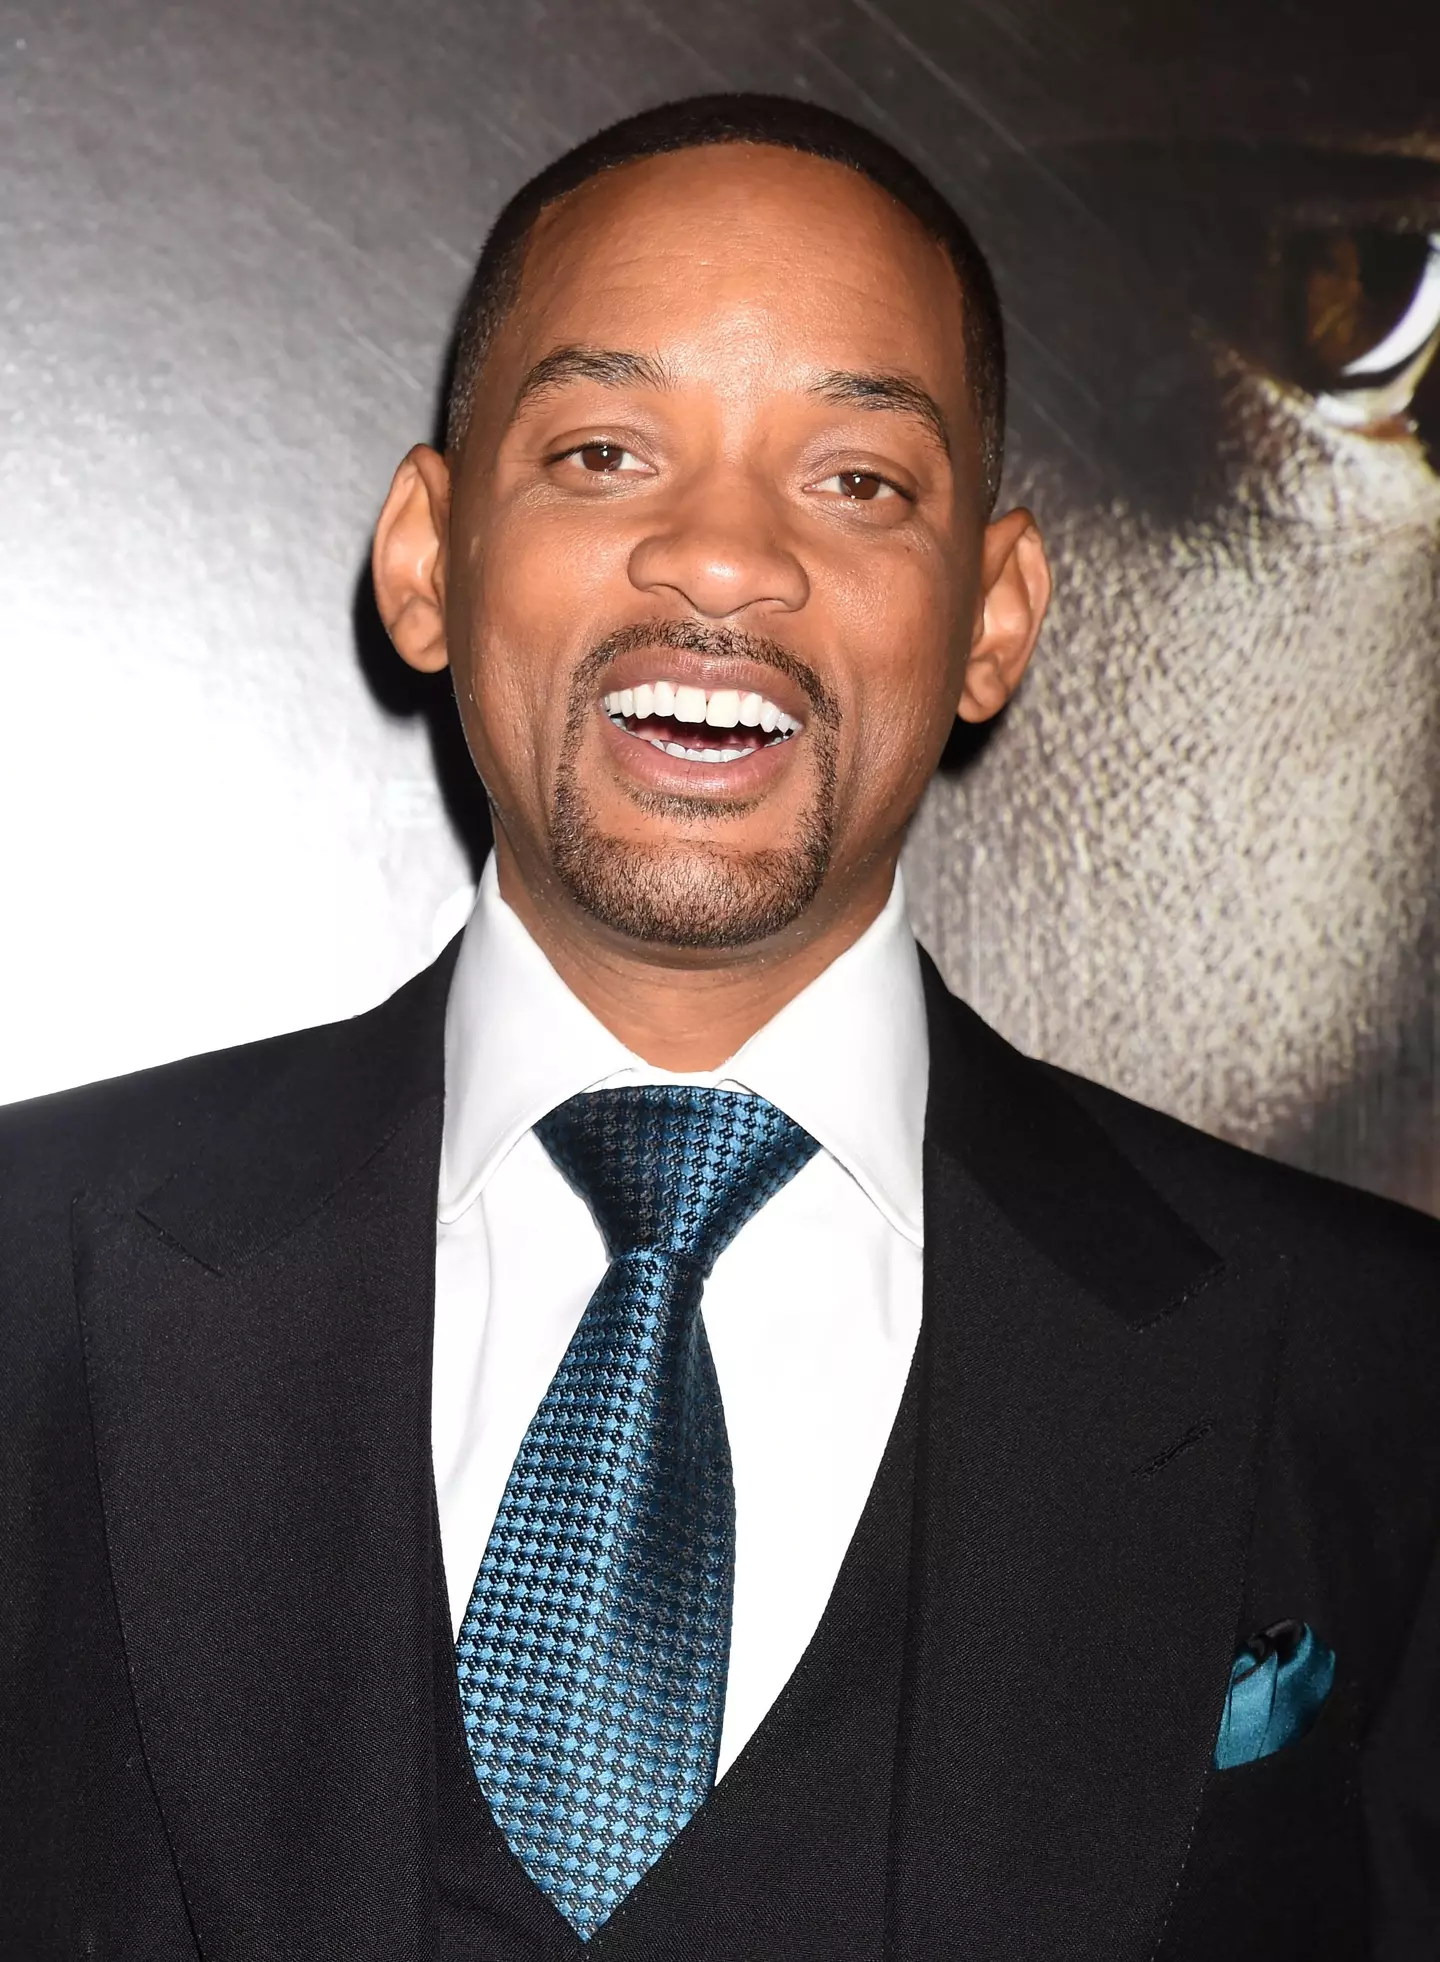 Will Smith’s fee for his upcoming film Emancipation cements him as the second highest paid actor for a recent film deal.